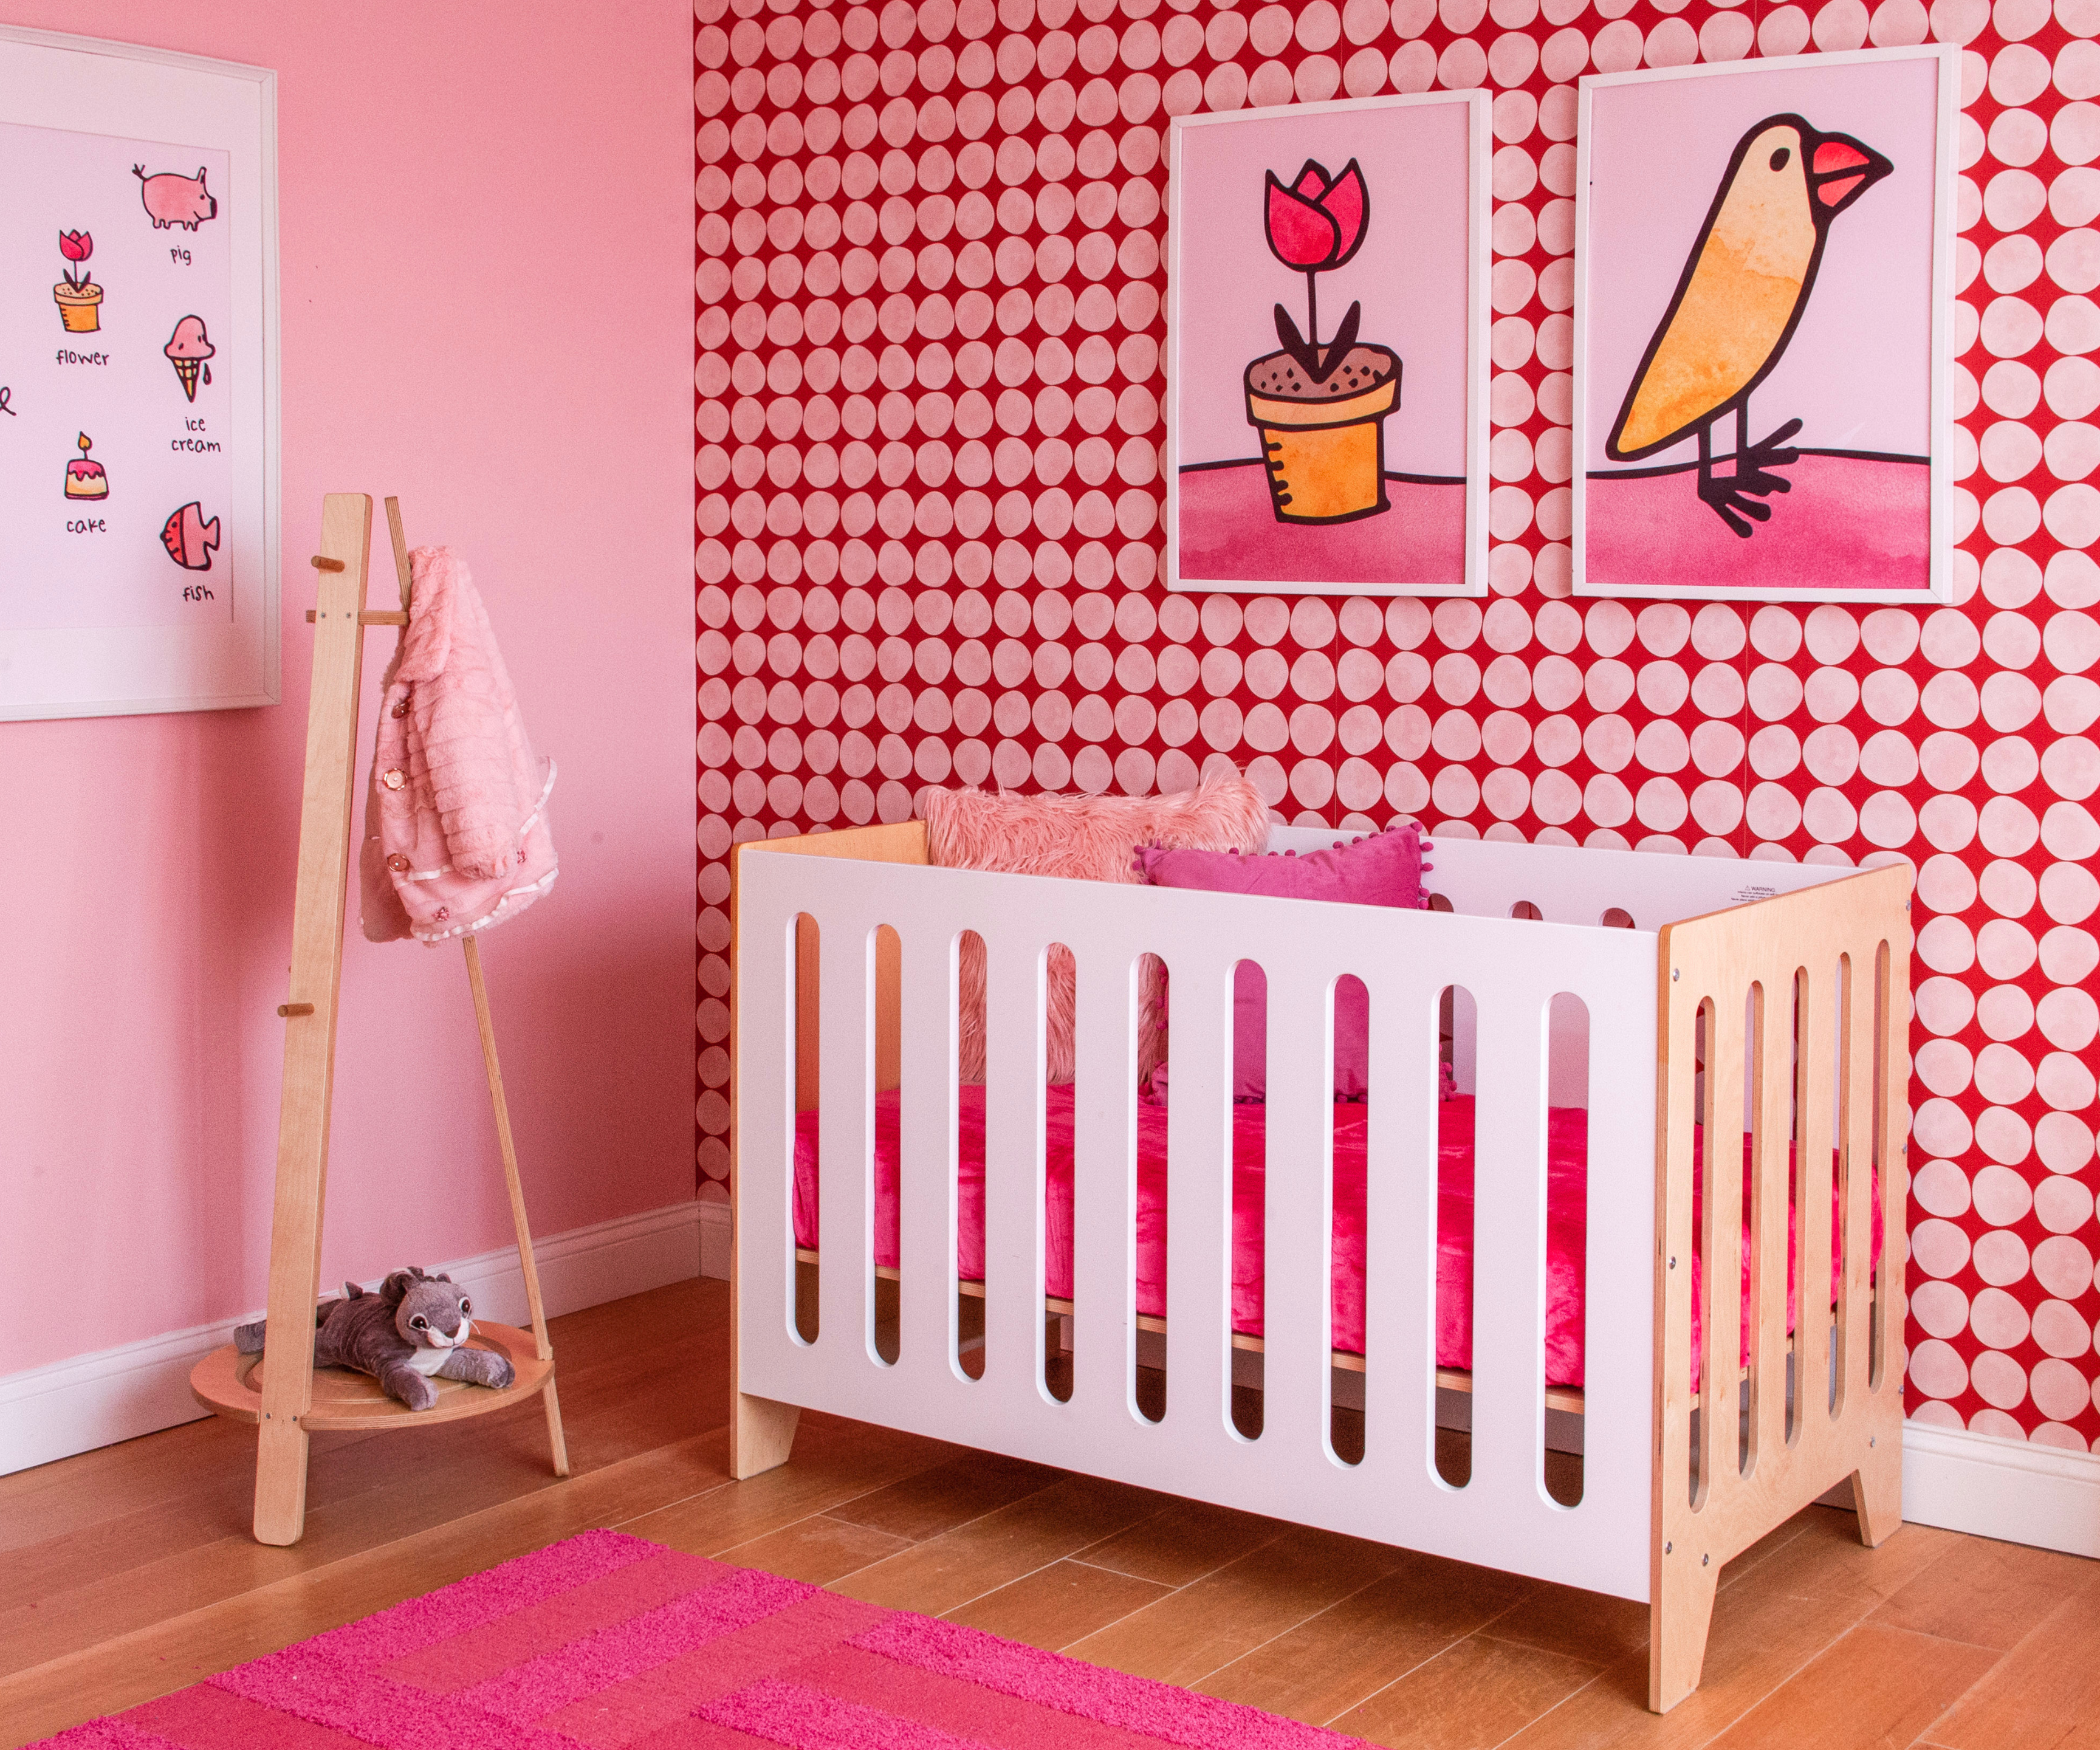 Nursery room with pink patterned wallpaper, white crib, and colorful artworks on the wall.